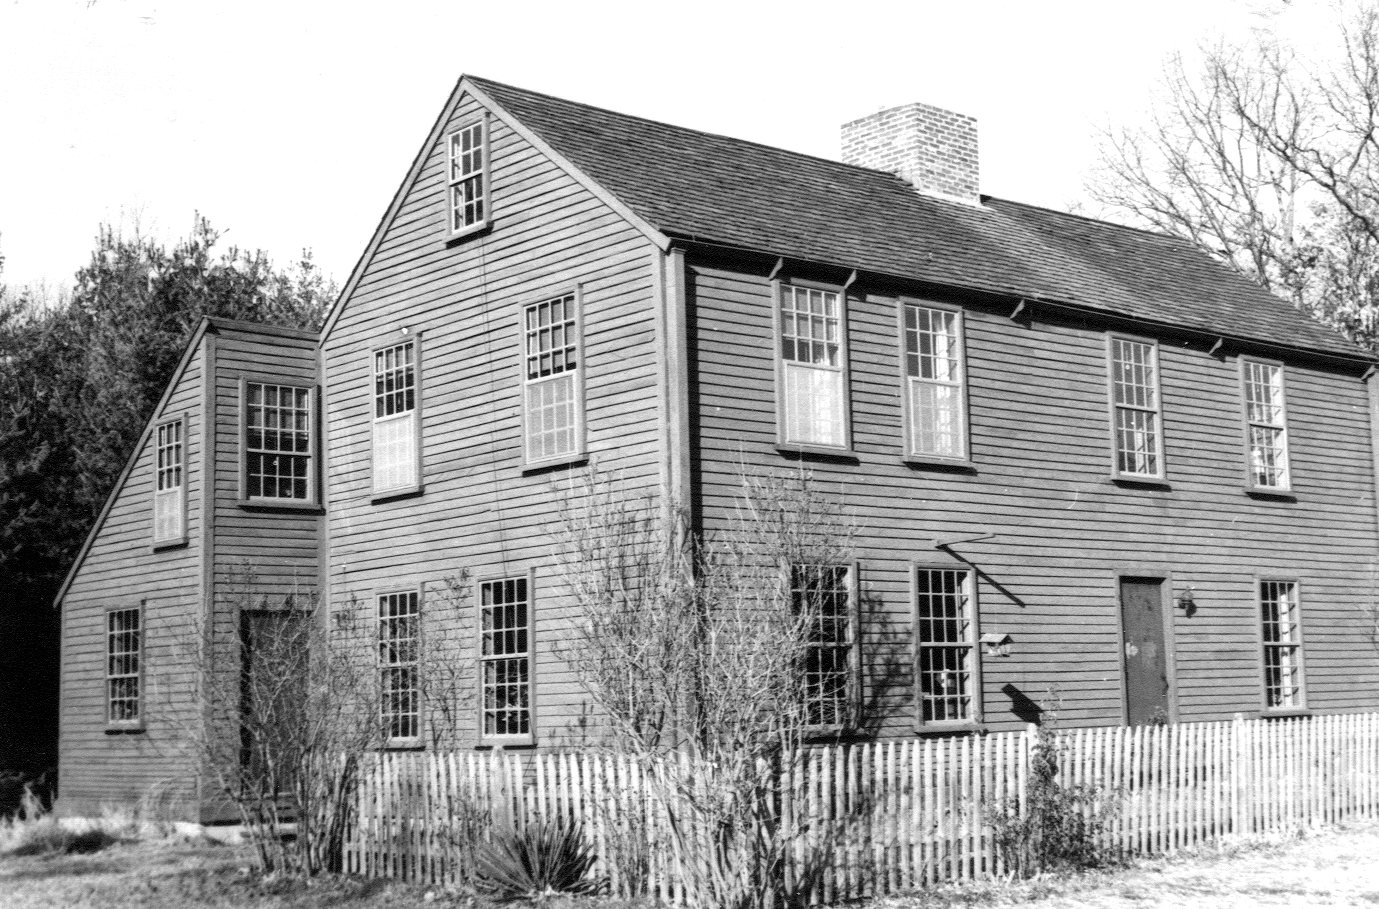 Lawrence Rd, Boxford MA 1730. This house was moved to the present site and reconstructed by Earl Newton